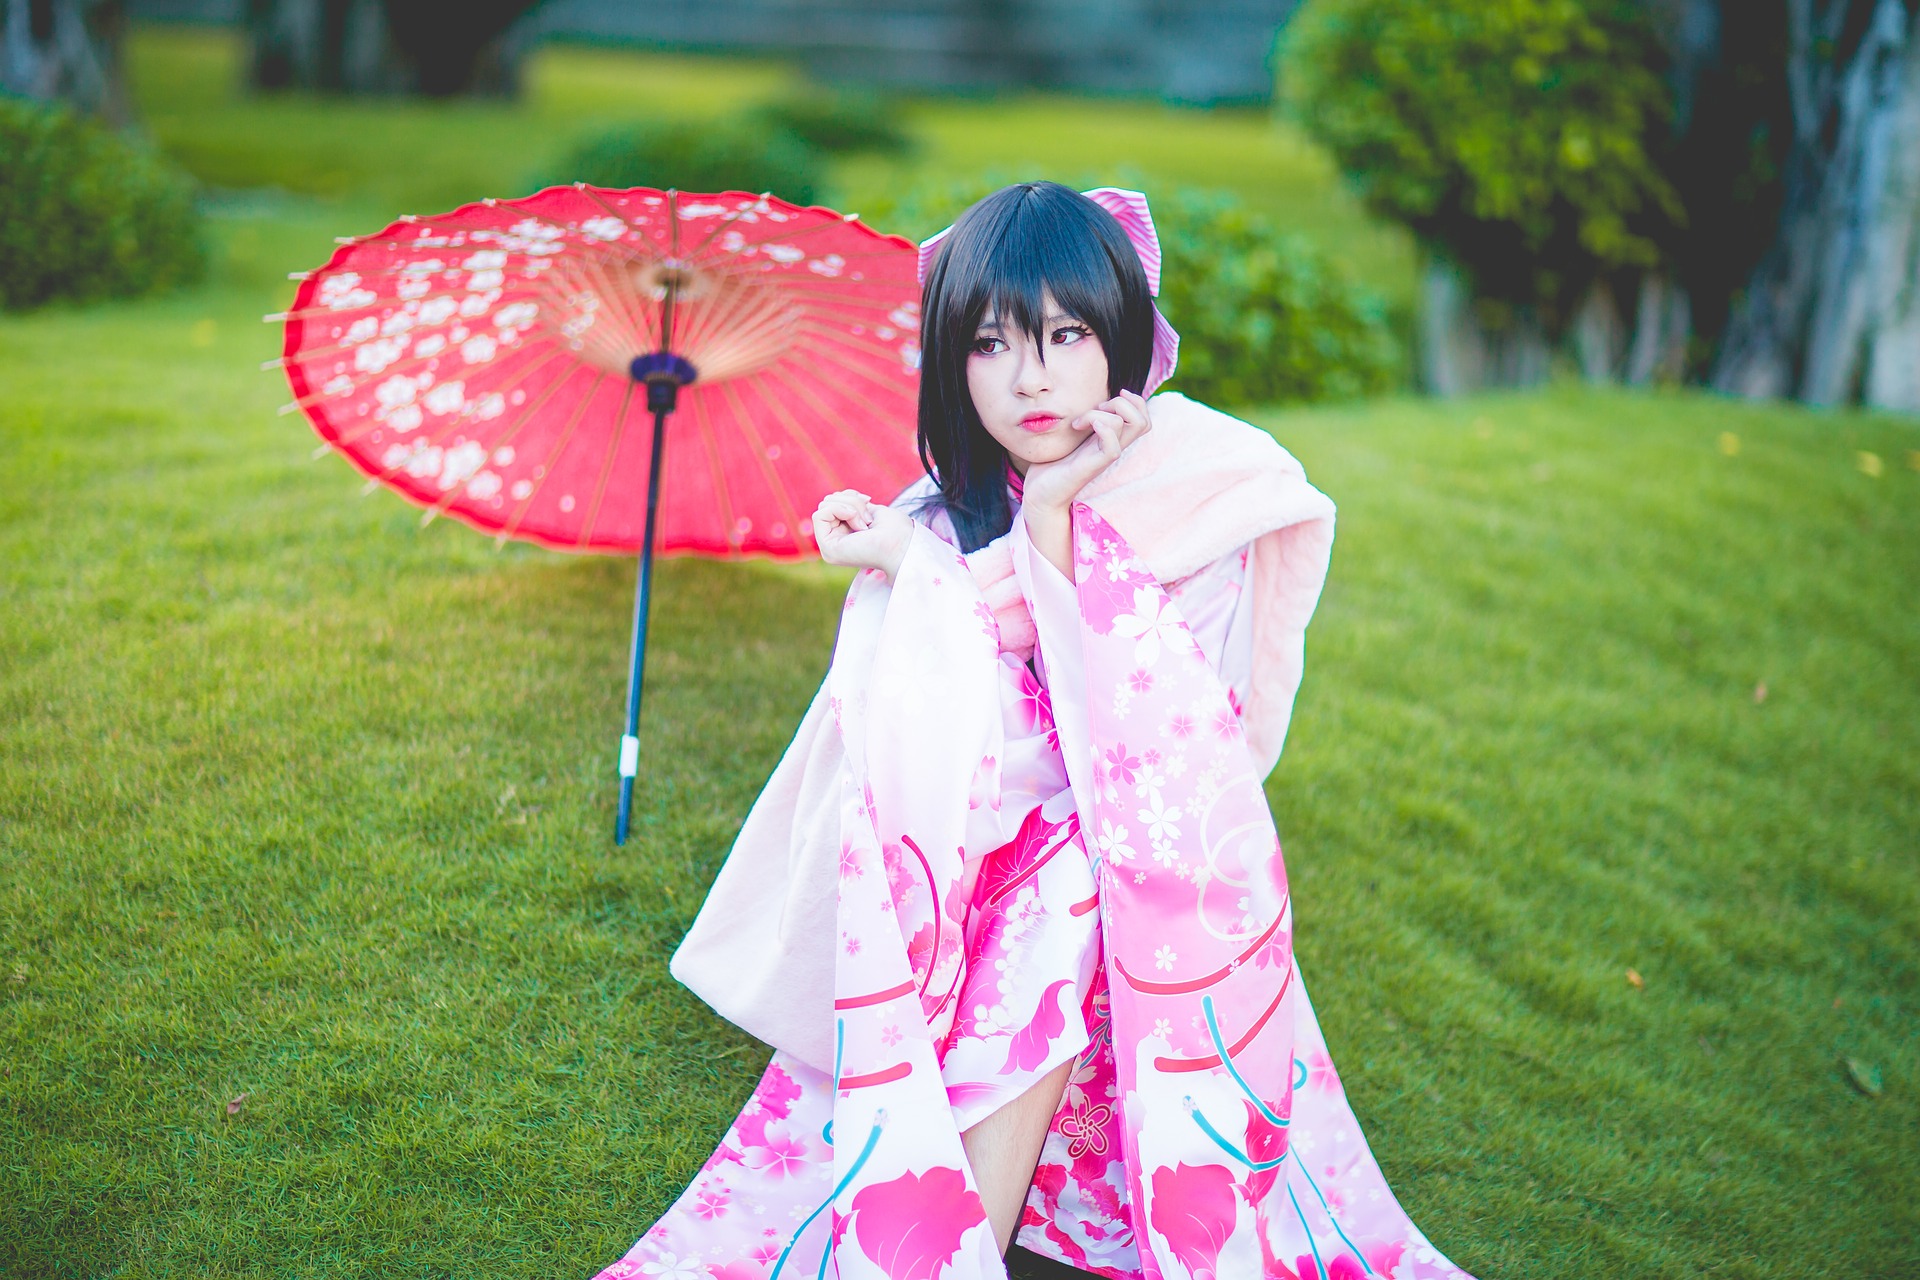 Japanese Anime Cosplay Is Spot On With Pink Kimono